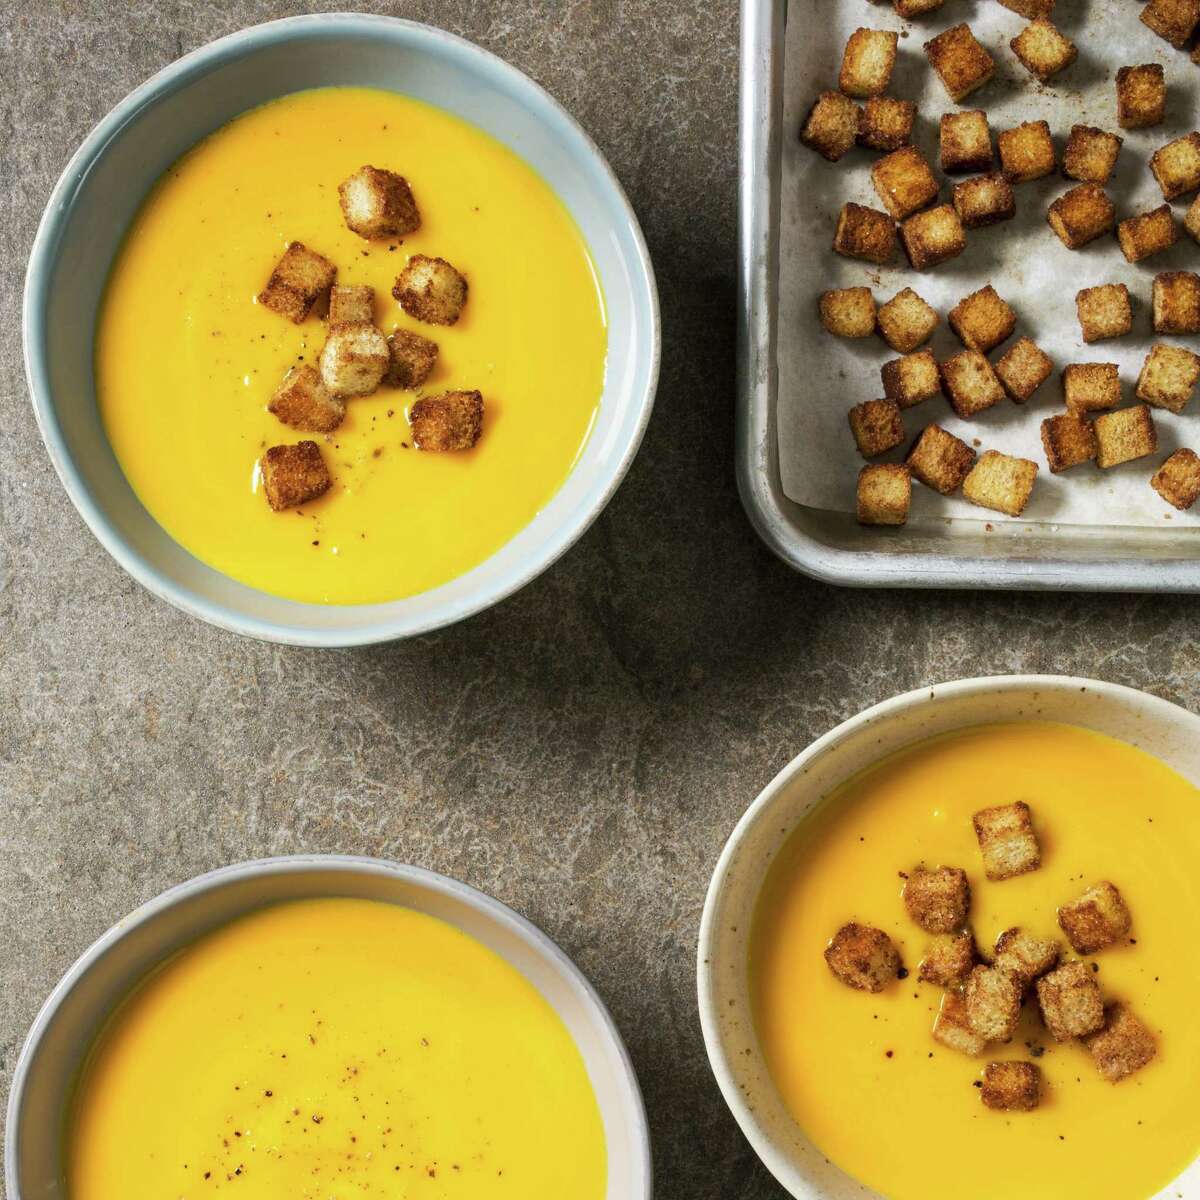 This undated photo provided by America's Test Kitchen in September 2018 shows creamy butternut squash soup in Brookline, Mass. This recipe appears in the cookbook "All-Time Best Soups." (Carl Tremblay/America's Test Kitchen via AP)